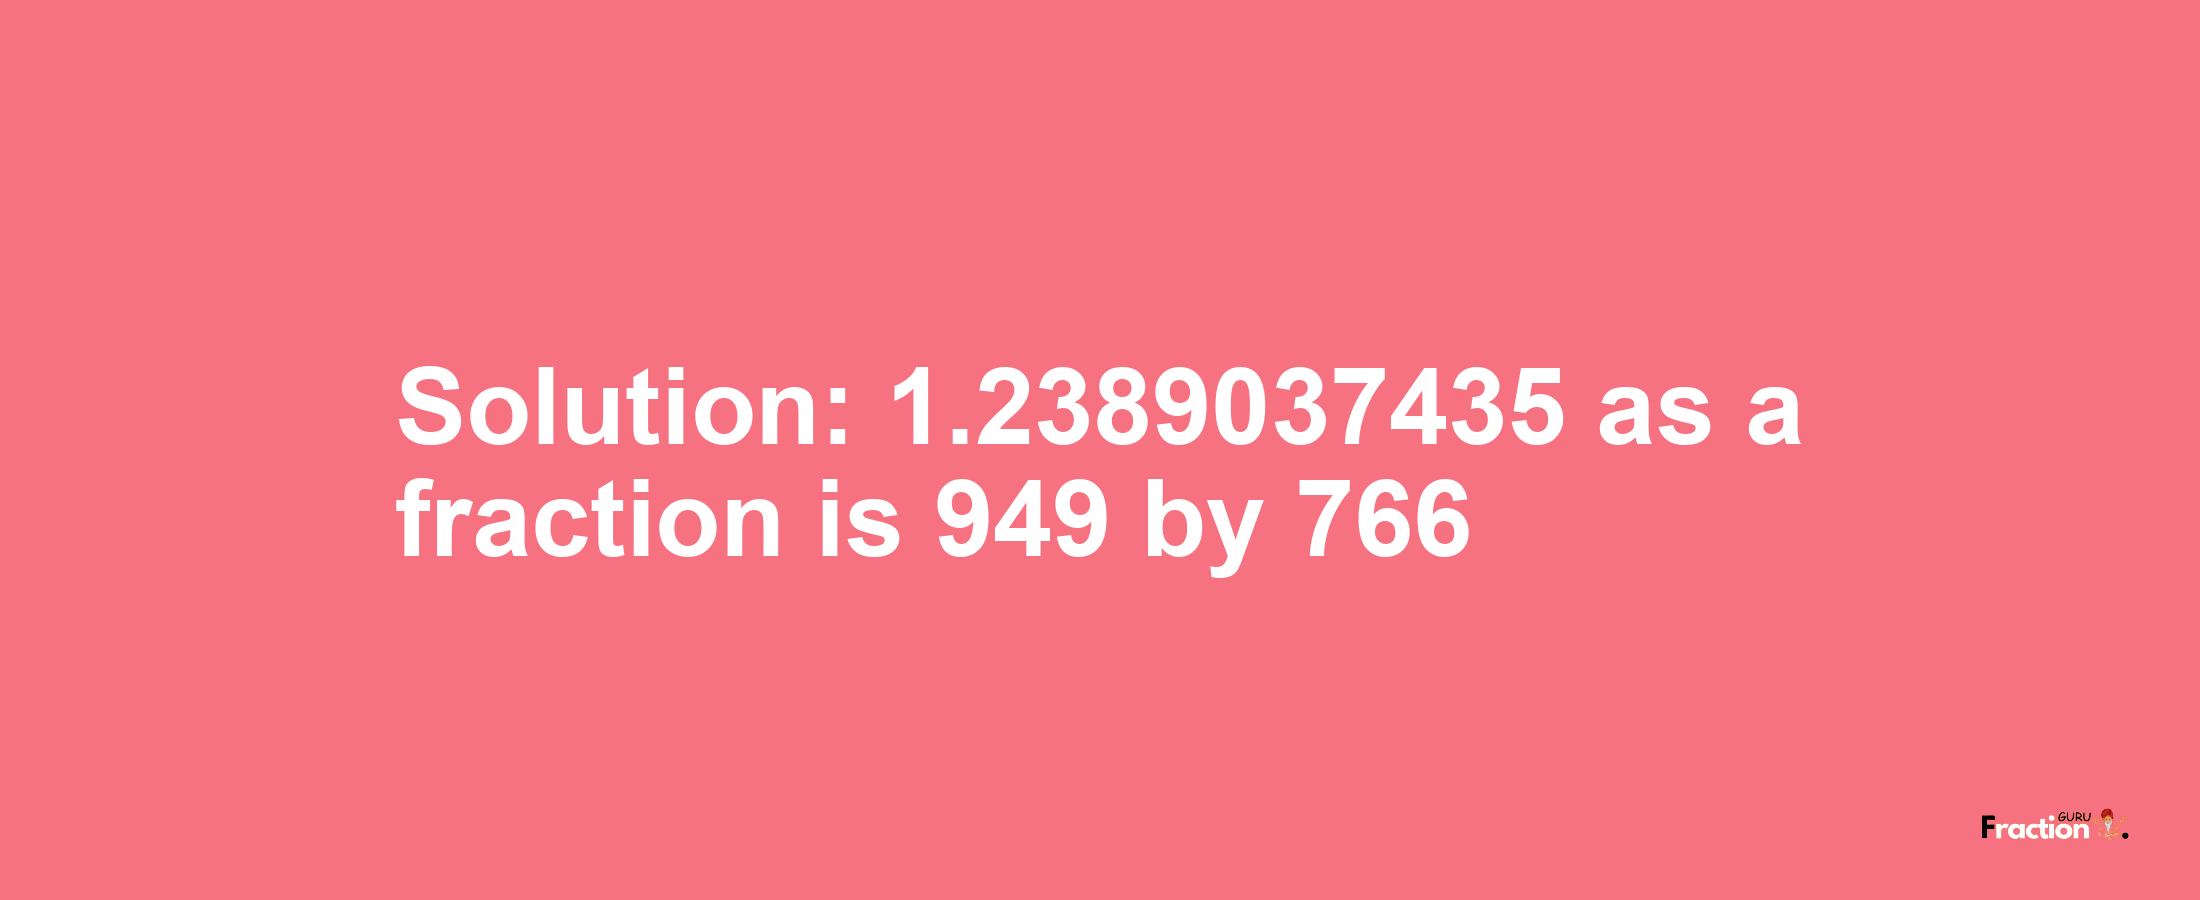 Solution:1.2389037435 as a fraction is 949/766